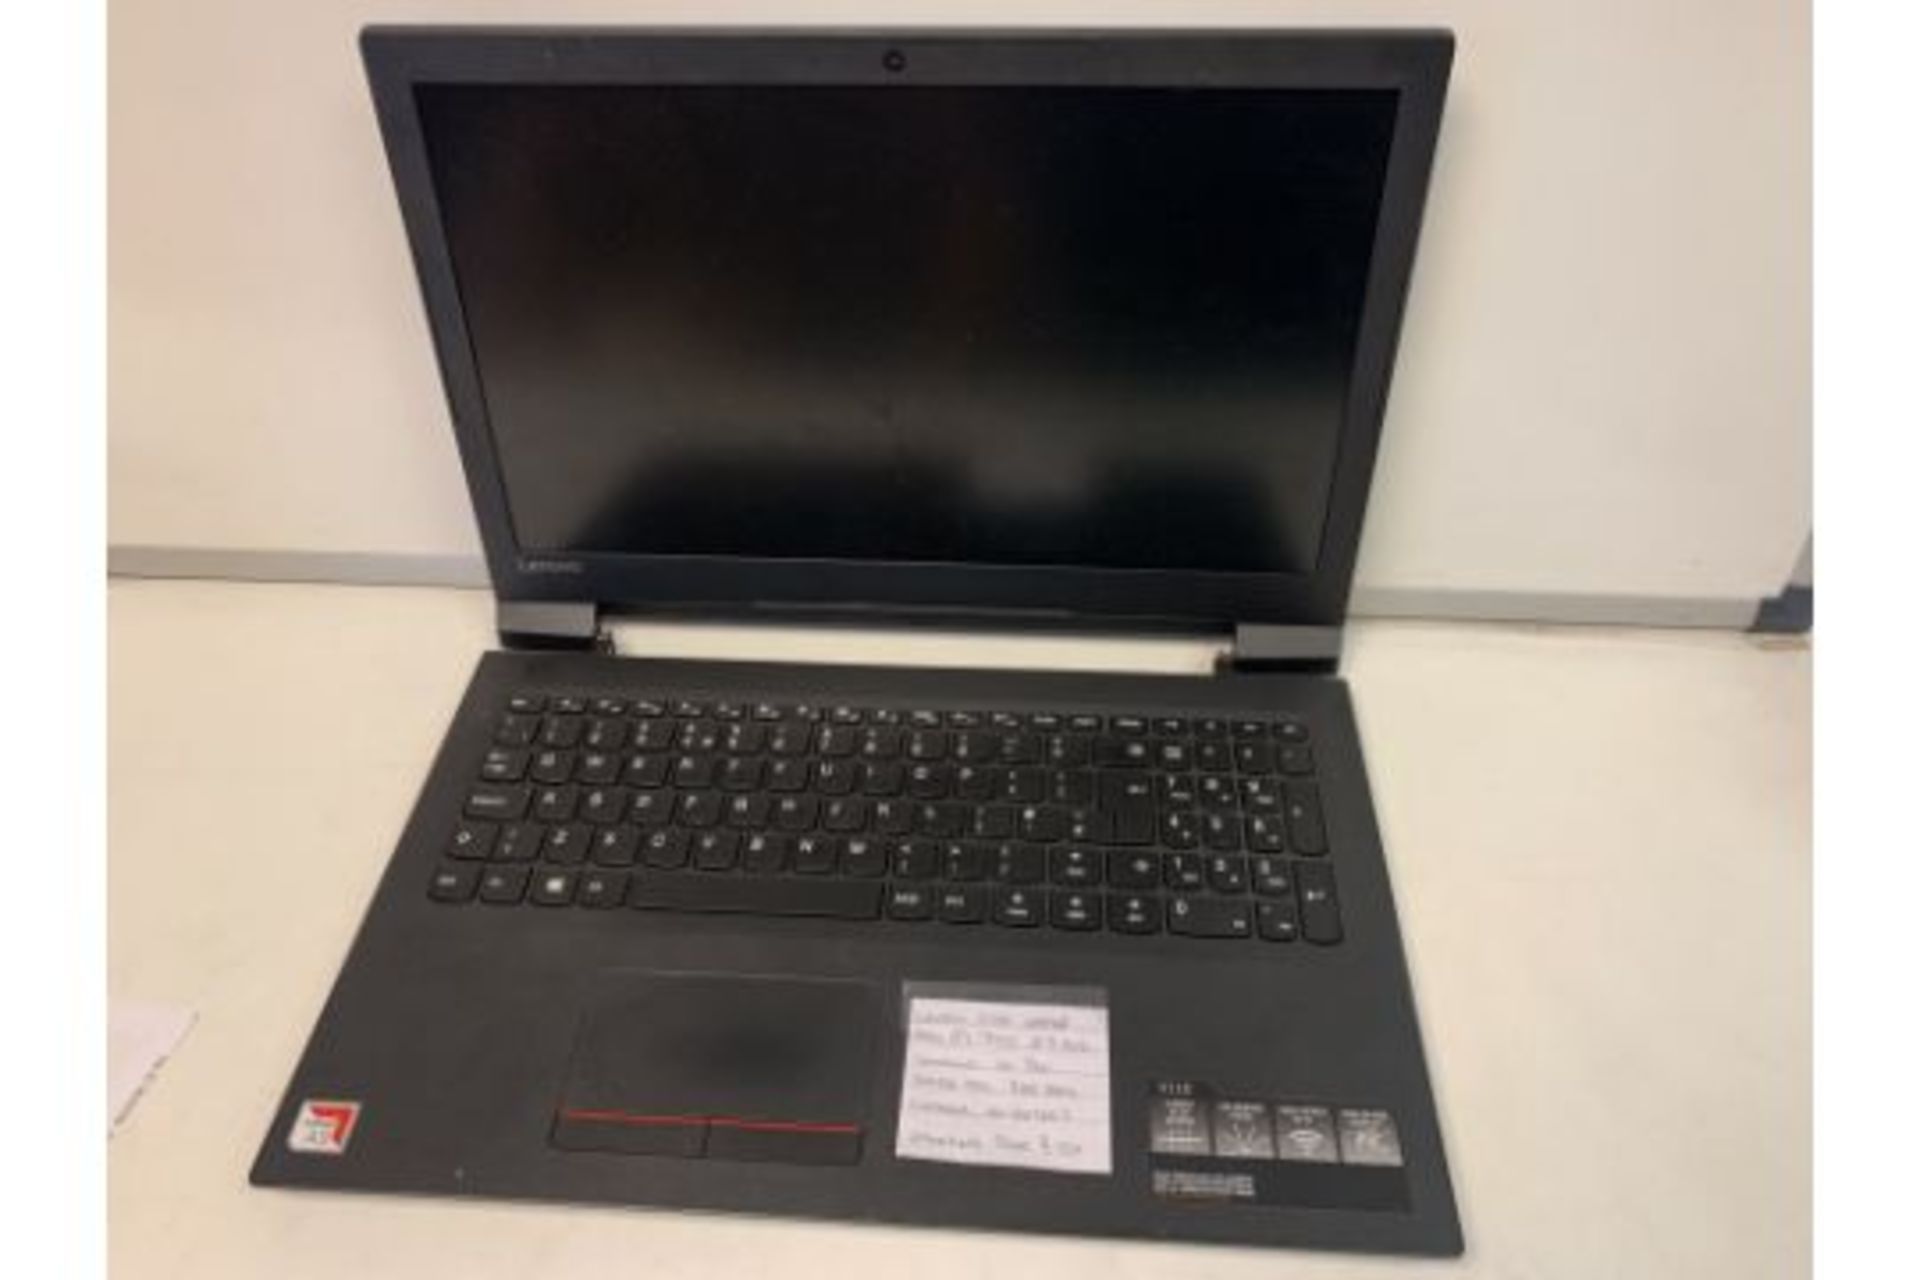 LENOVO V110 LAPTOP, AMD A9-9410, 2.9GHZ, WINDOWS 10 PRO, 320GB HDD, 8GB RAM WITH CHARGER (NO